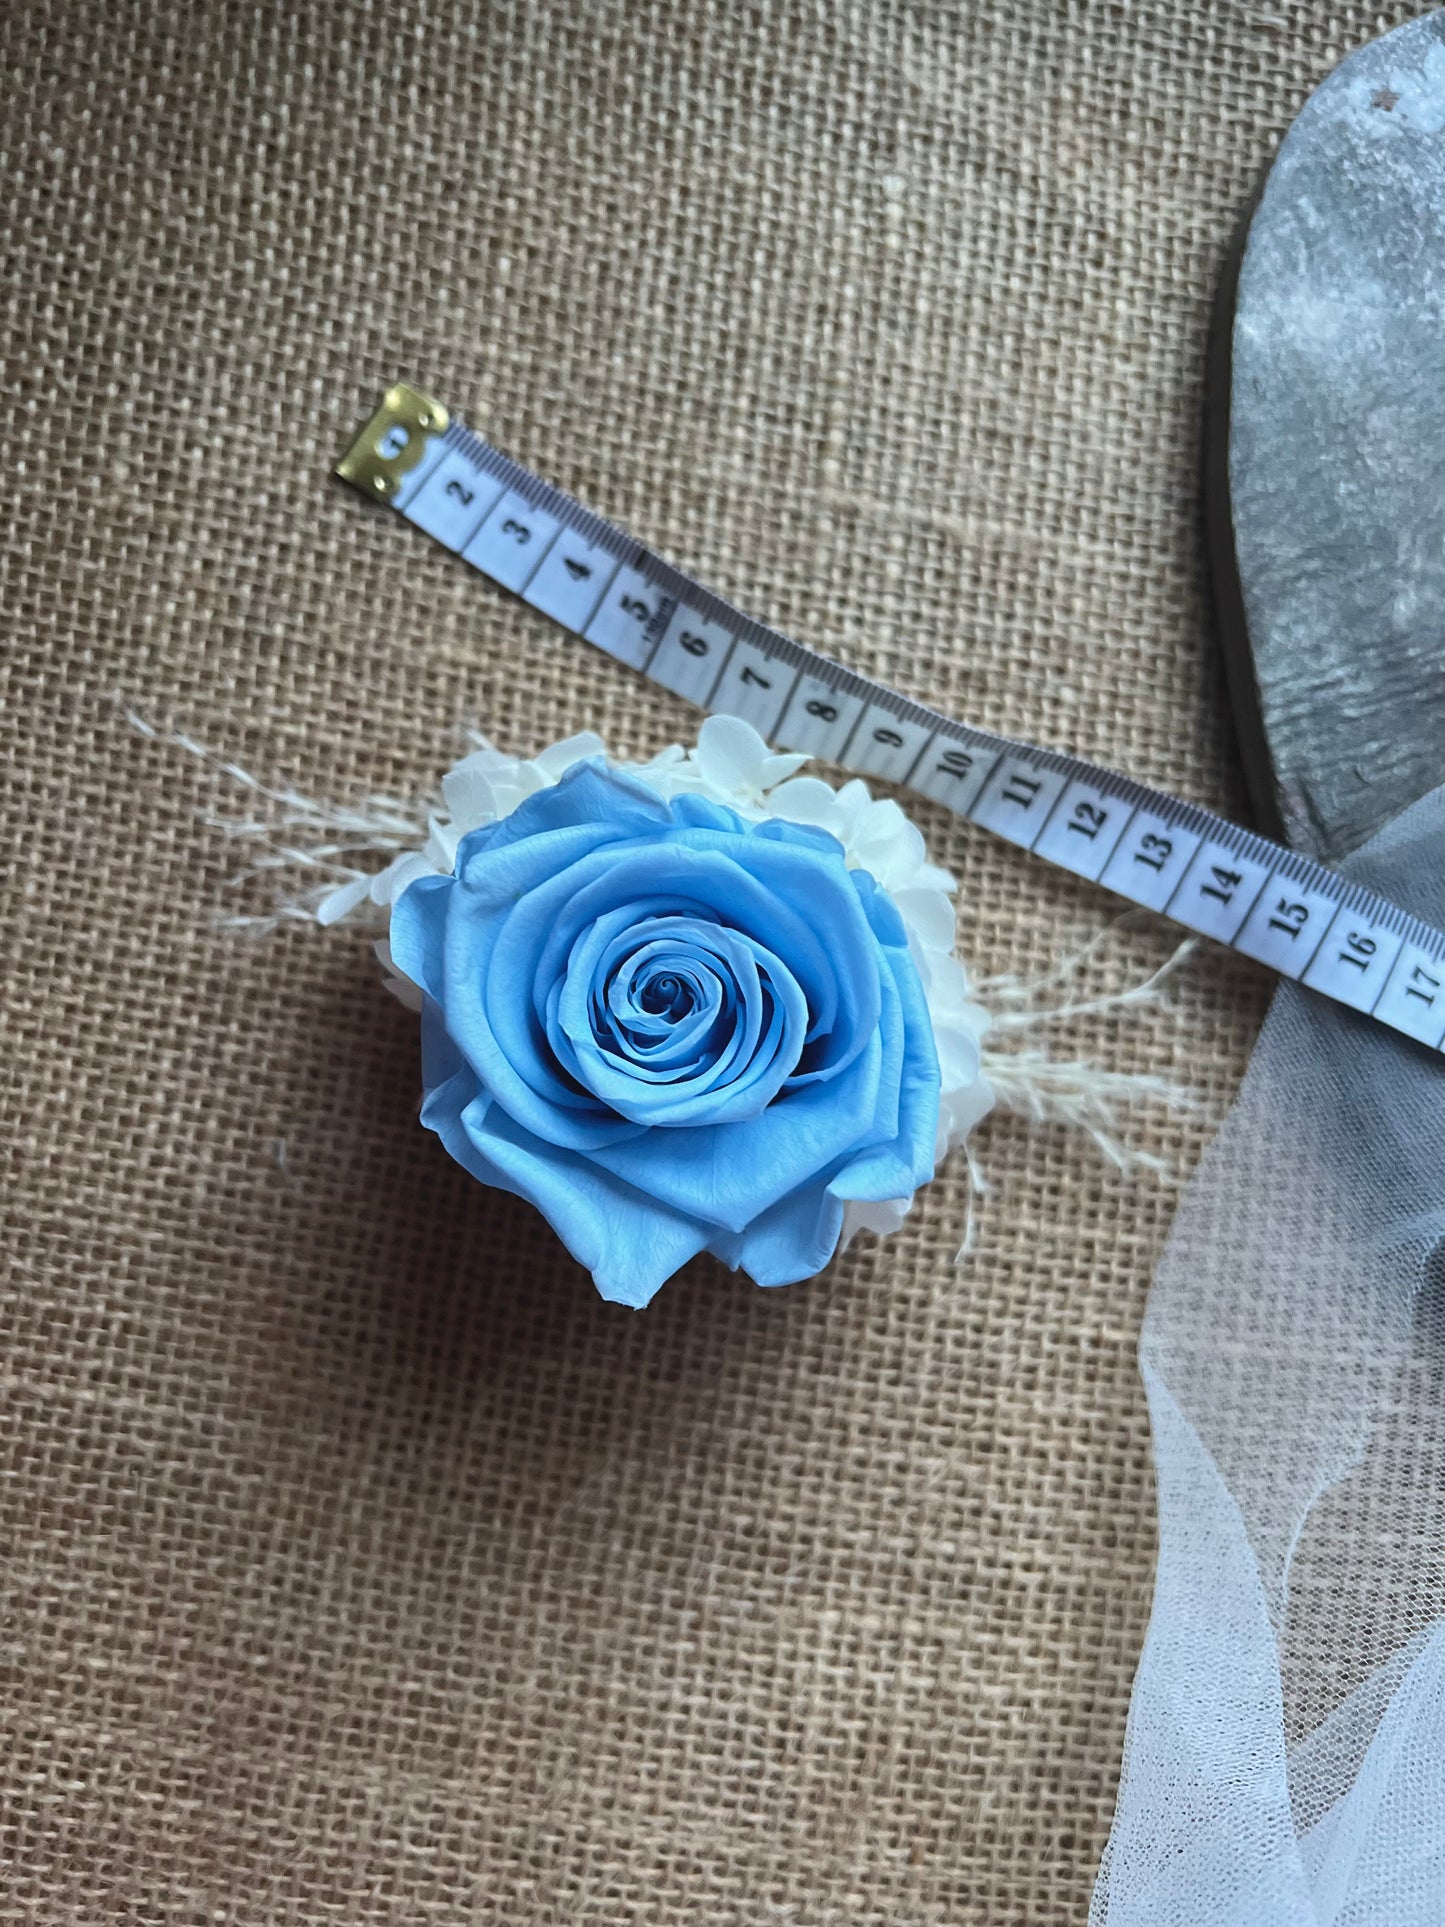 Blue and White Bridal Rose Floral Hair Accessories, Wedding Hair Piece for Brides, Classic Bride Rose Dried Flower Hair Comb Head piece UK